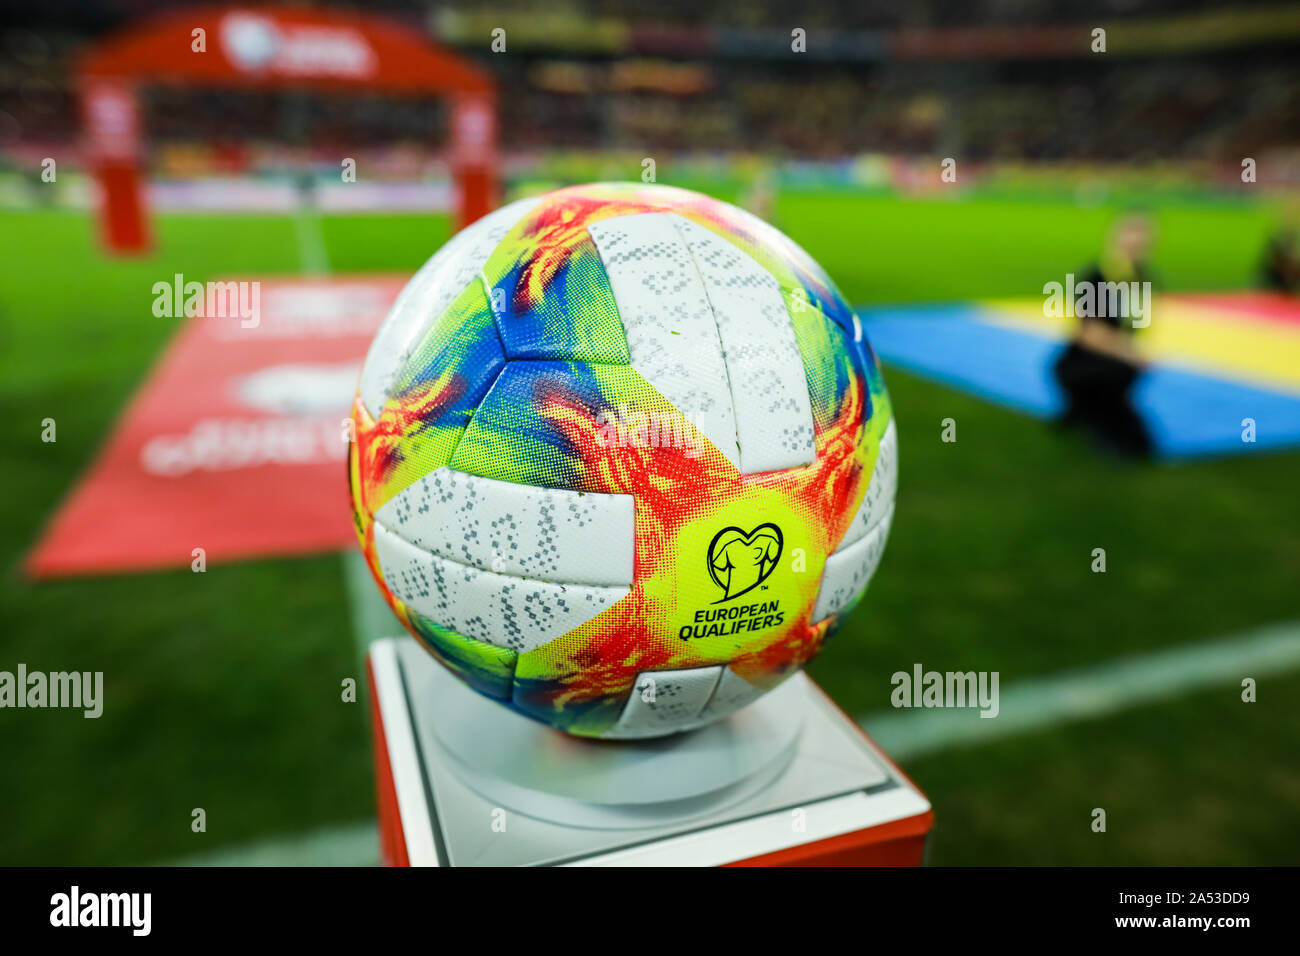 Bucharest, Romania - October 15, 2019: Details with the Adidas Conext 19 European qualifiers official soccer match ball on Arena Nationala stadium. Stock Photo